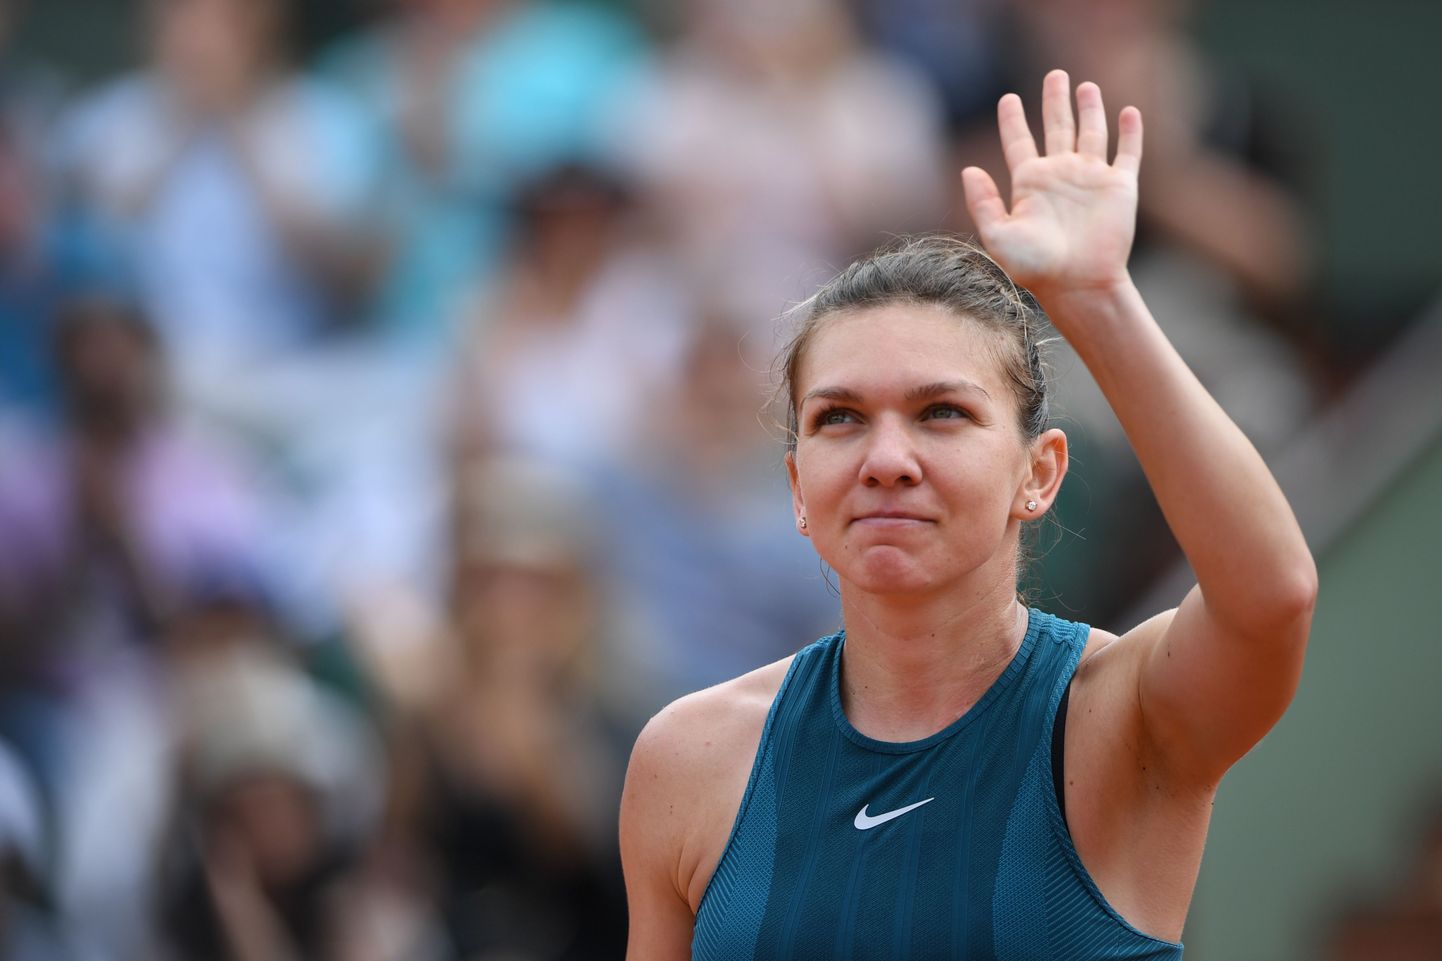 Romania's Simona Halep celebrates after victory at the end of her women's singles first round match against Alison Riske of the US on day four of The Roland Garros 2018 French Open tennis tournament in Paris on May 30, 2018. / AFP PHOTO / Eric FEFERBERG